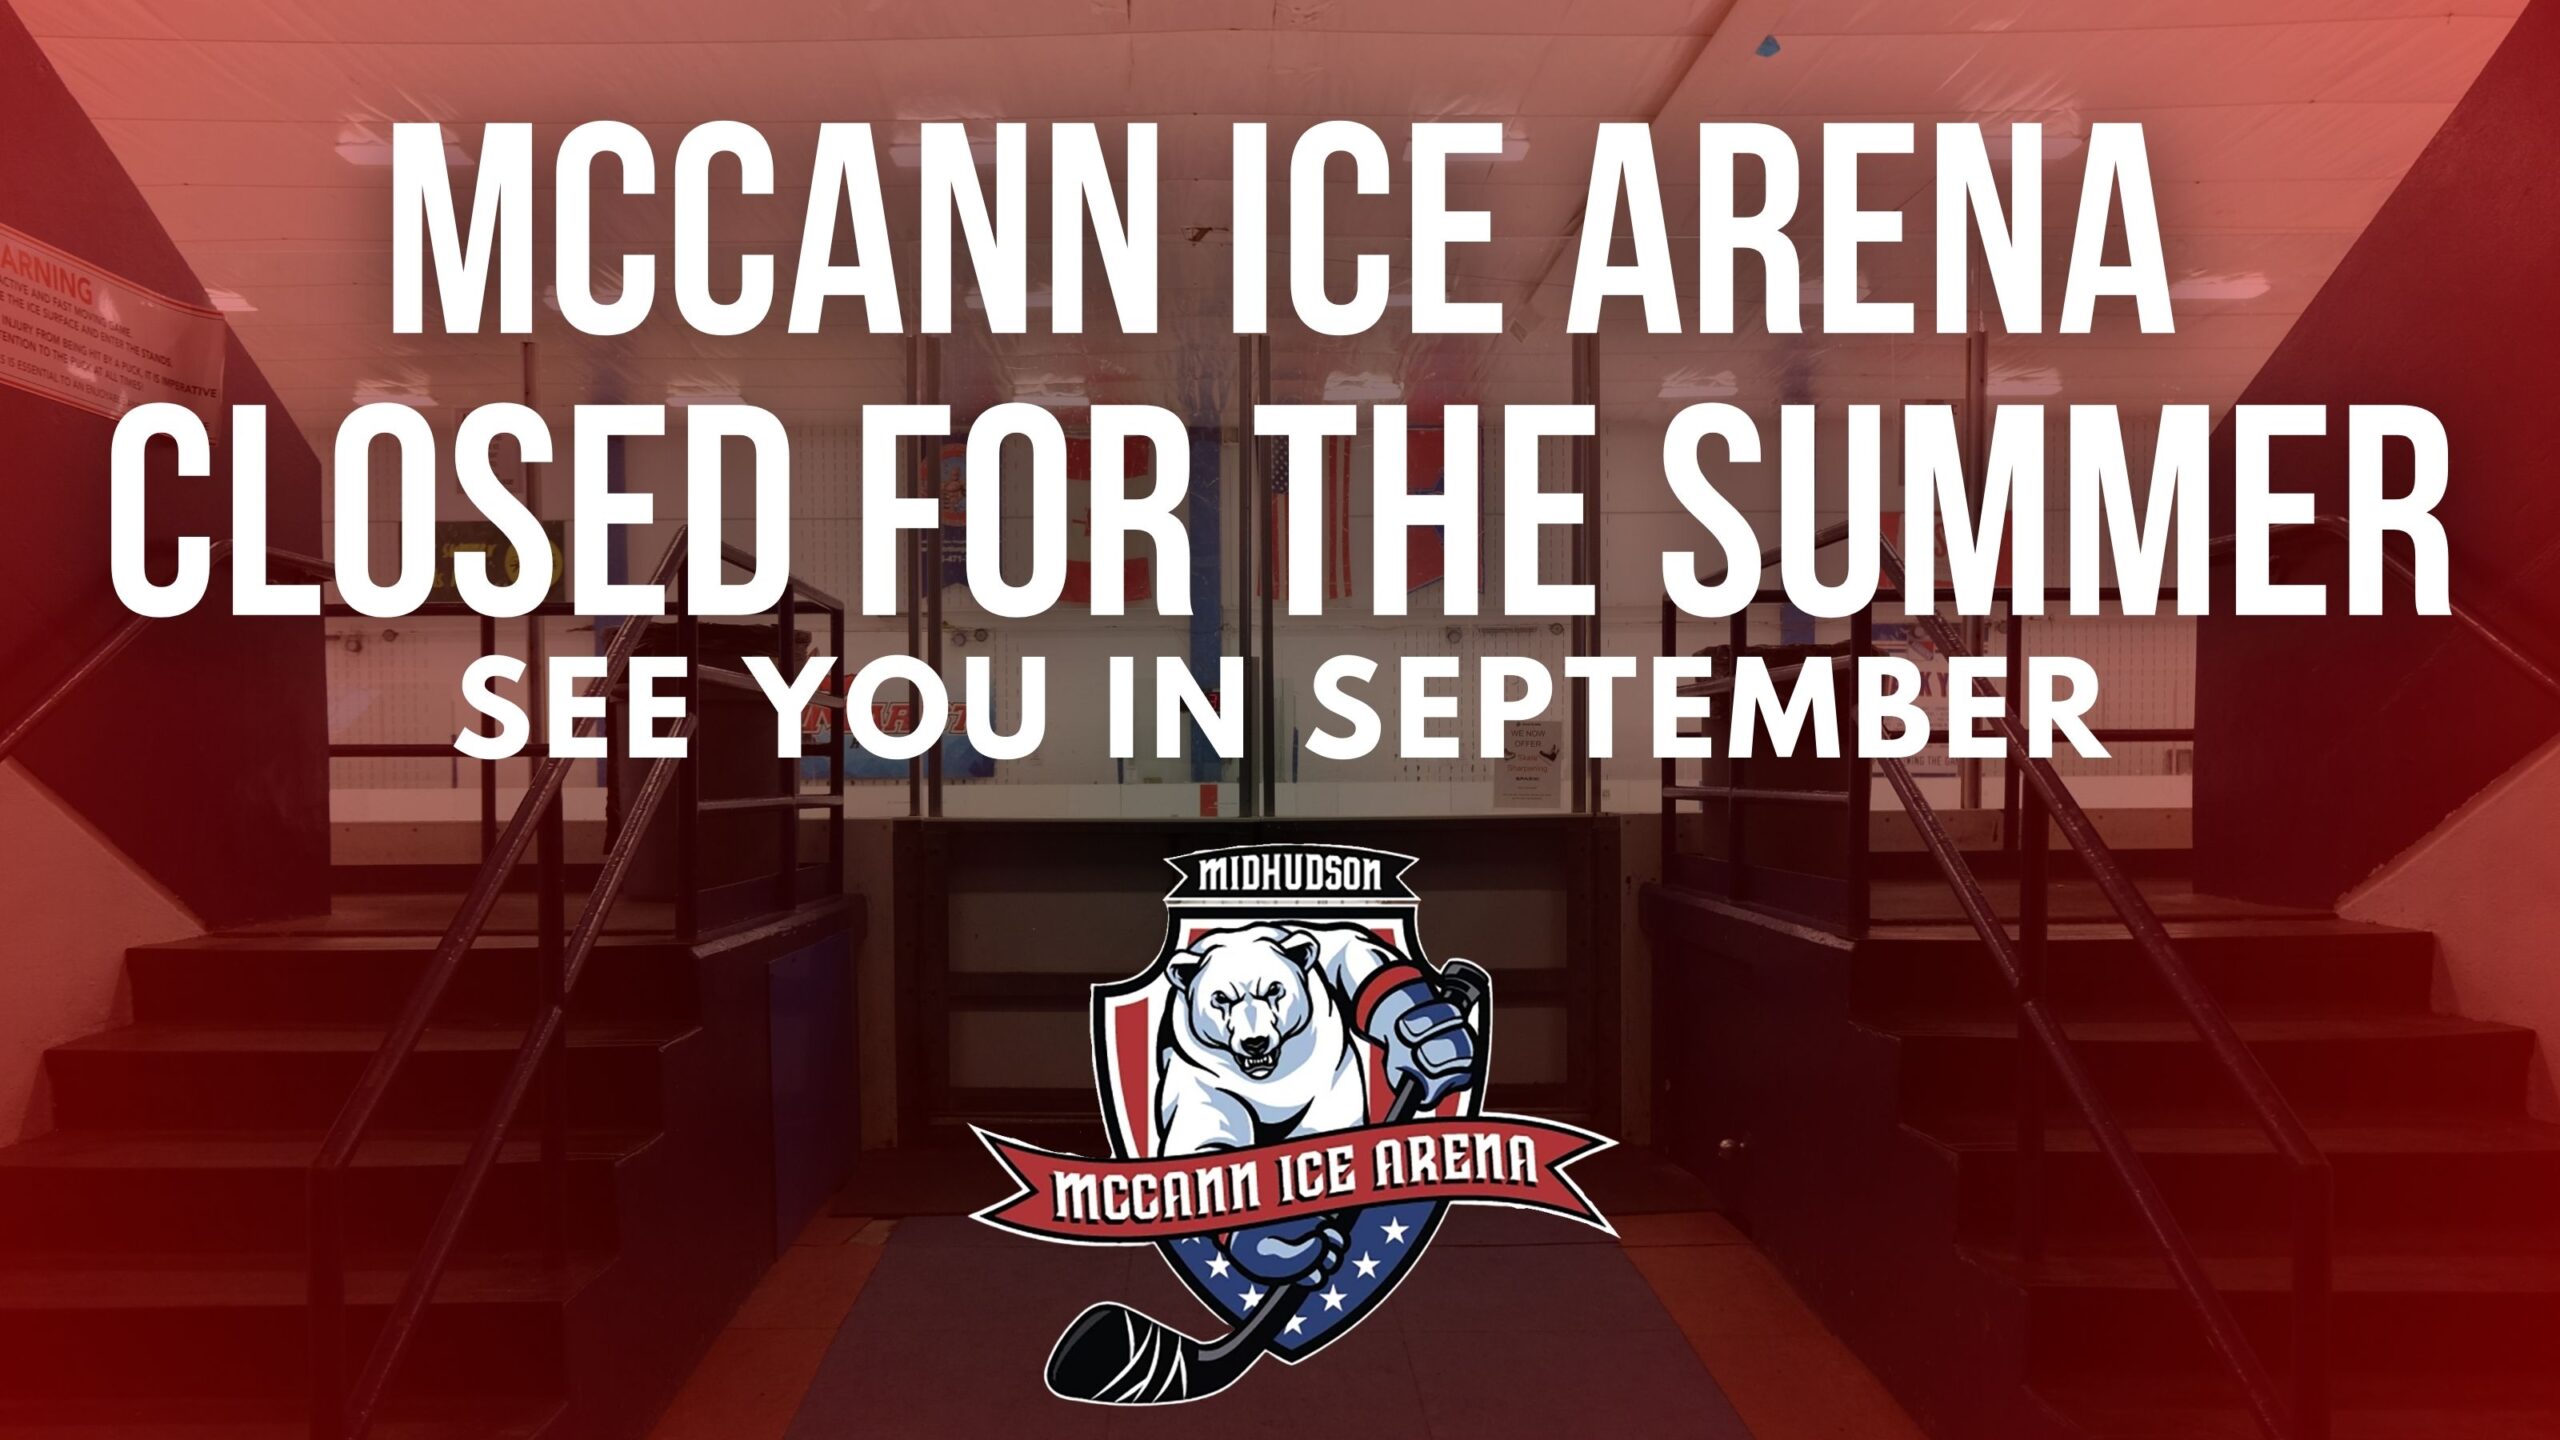 MCCANN ICE ARENA CLOSED FOR THE SUMMER